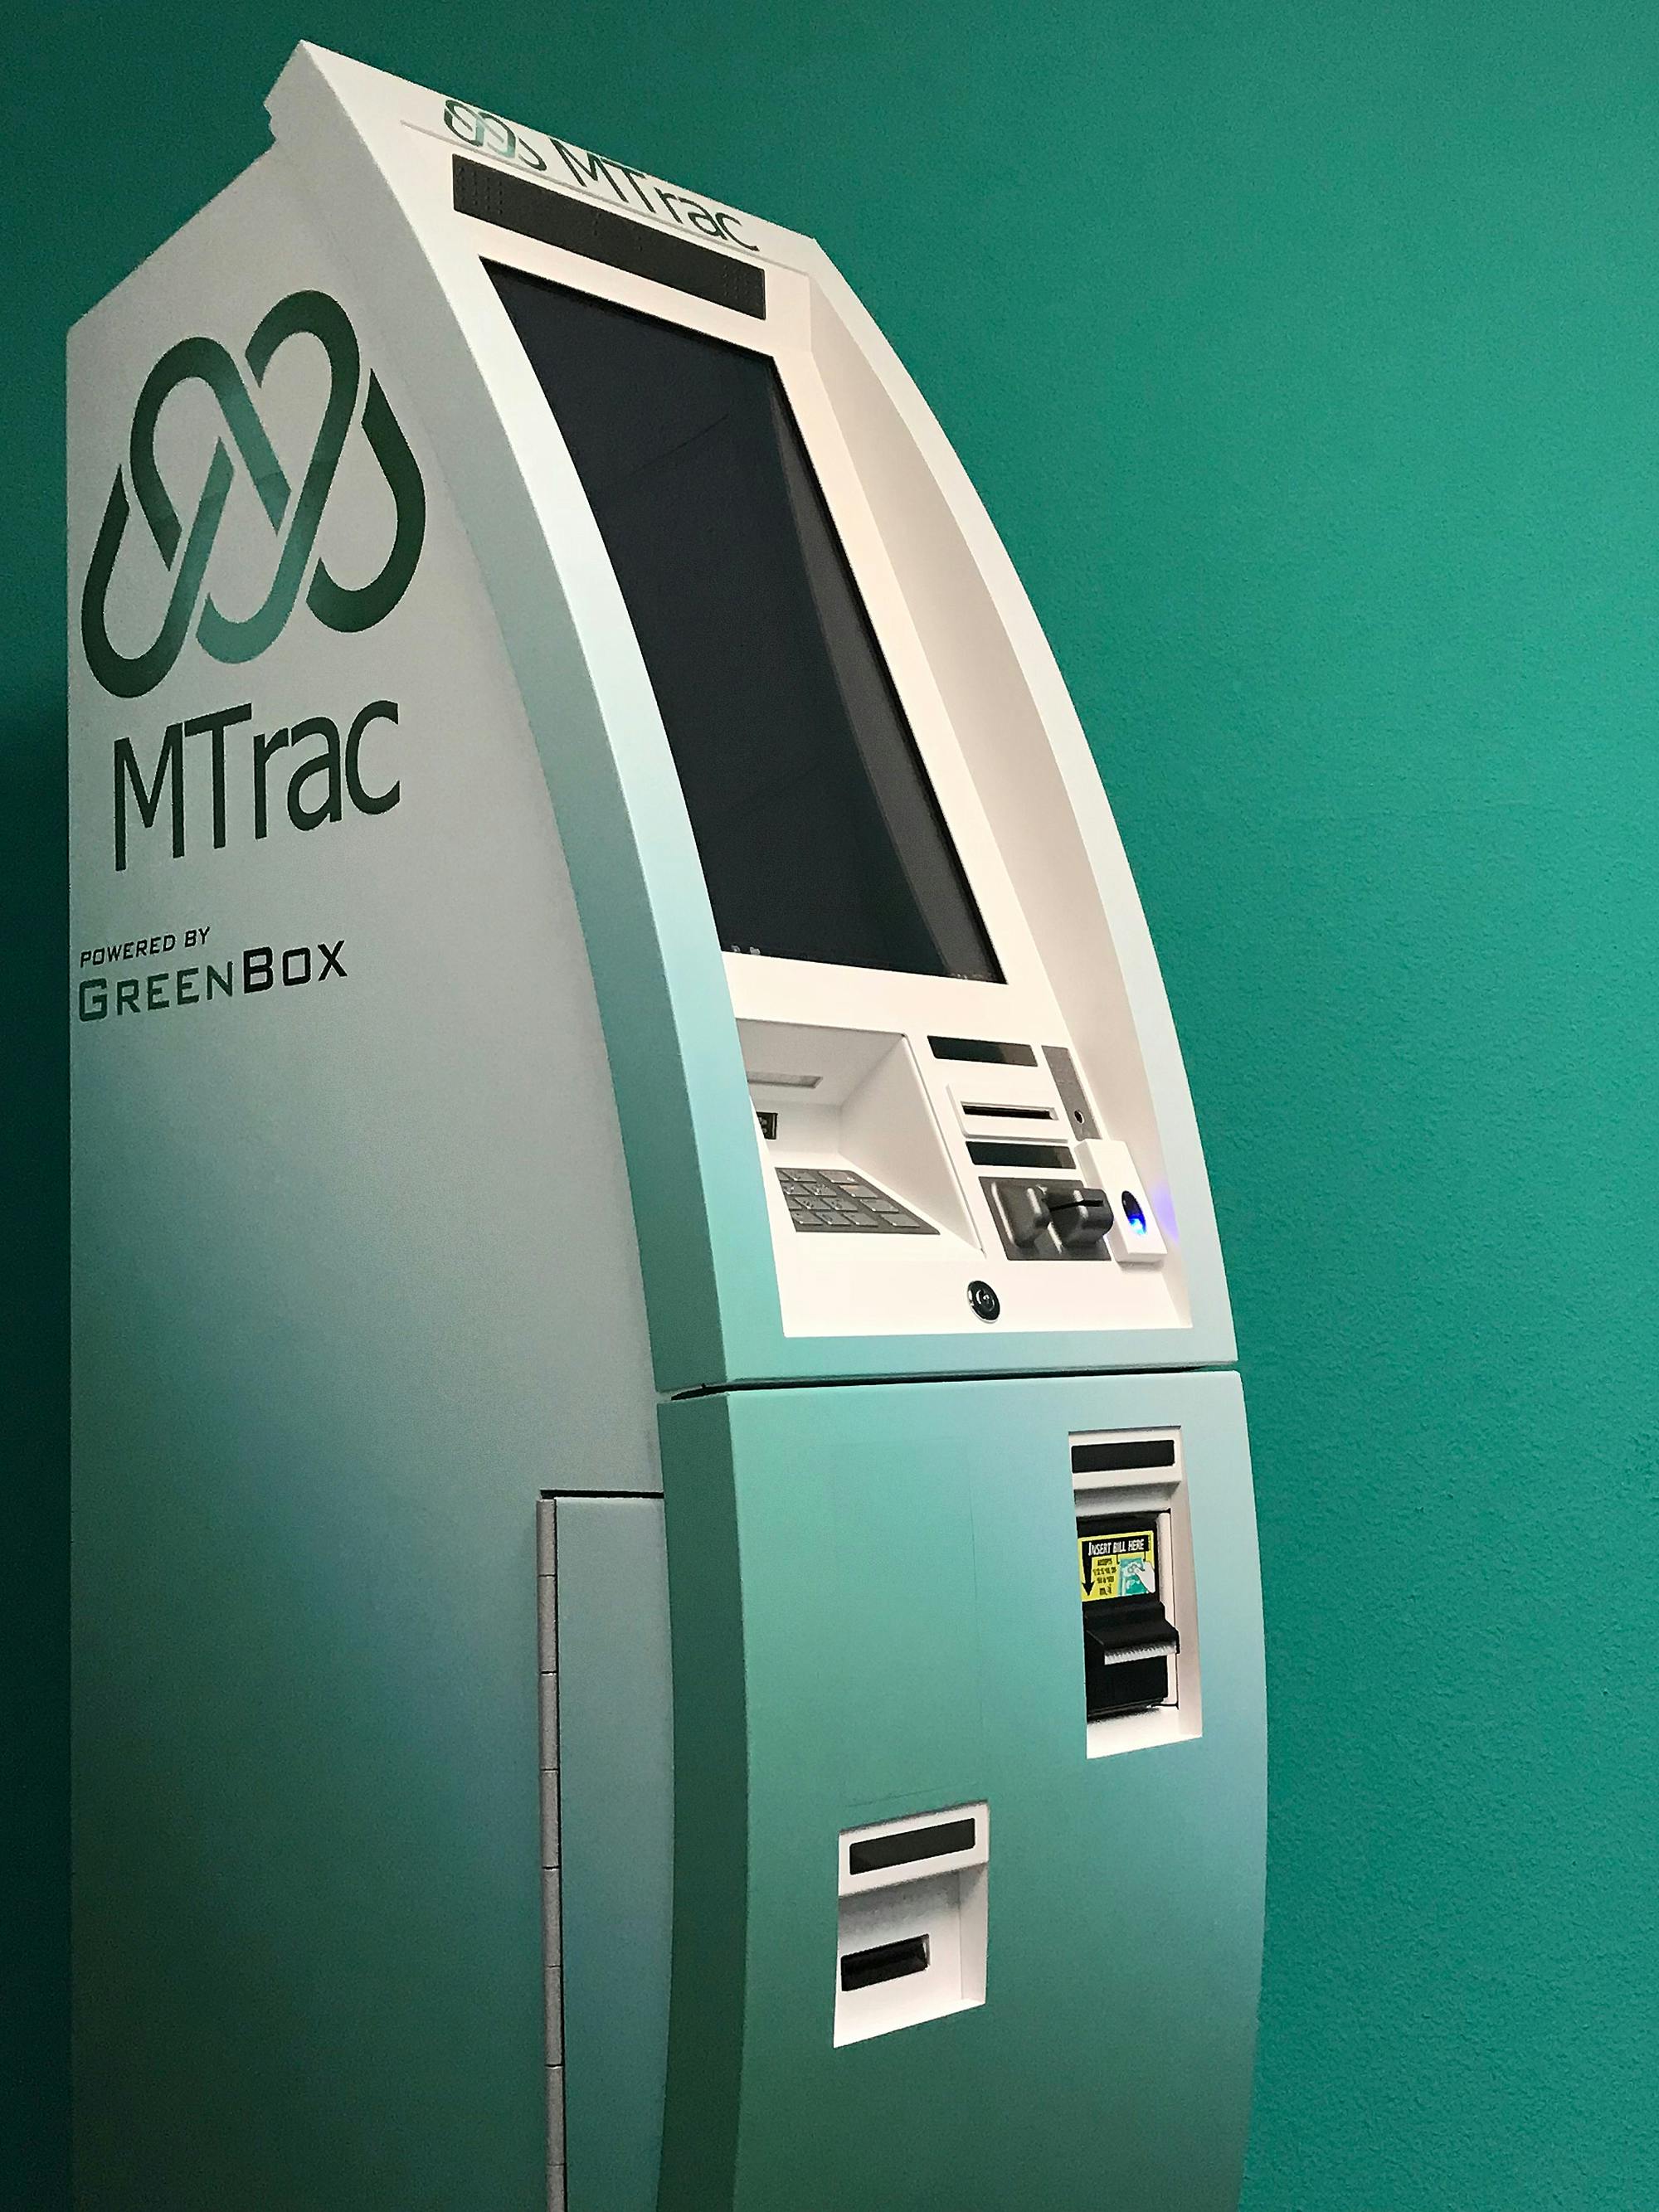 MTrac This company wants to make cannabis dispensaries totally cashless